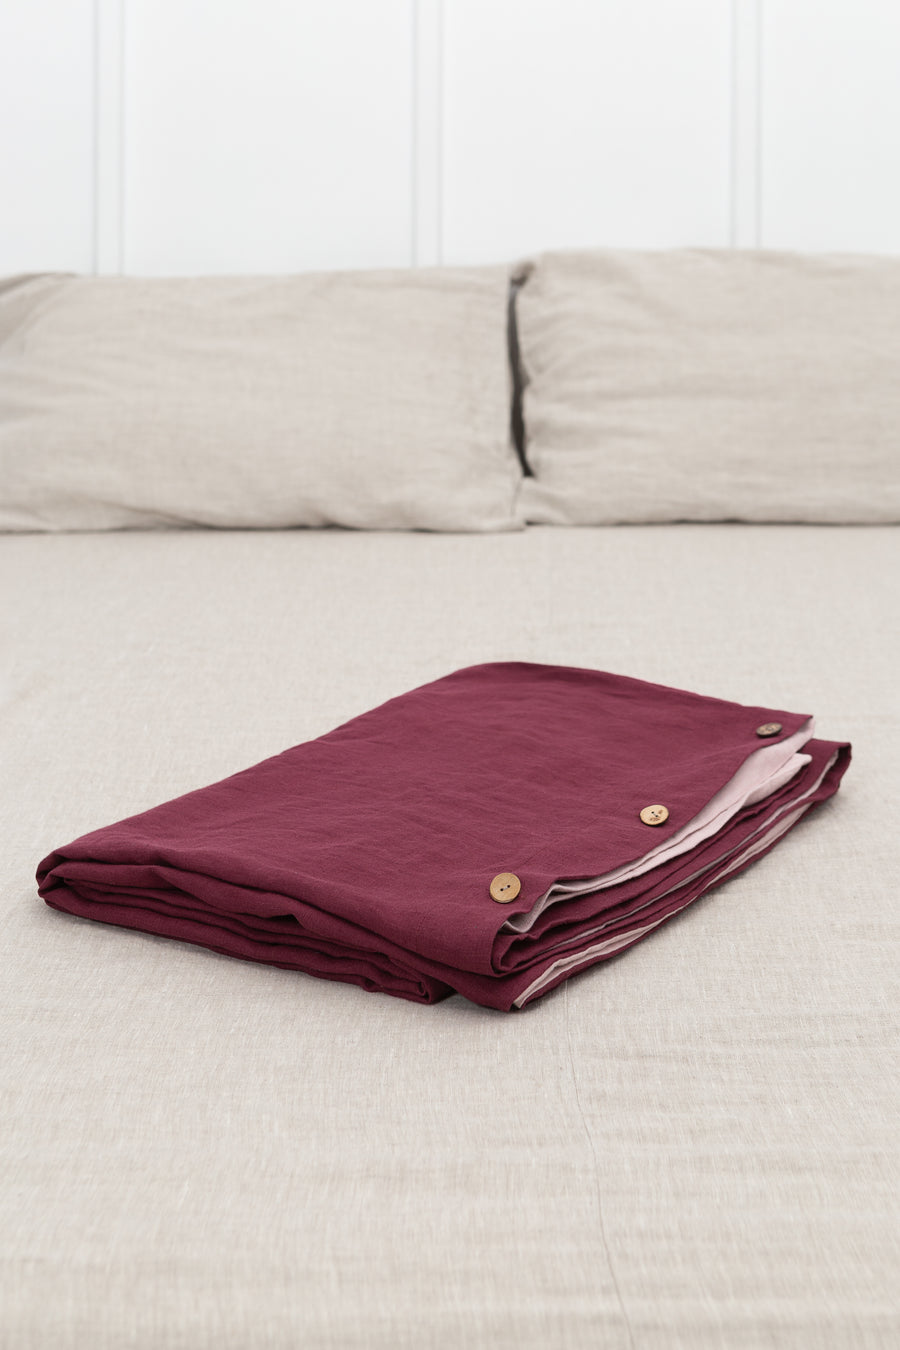 Two Sided Linen Bedding Set in Dark Plum and Pale Pink - Linen Couture Boutique